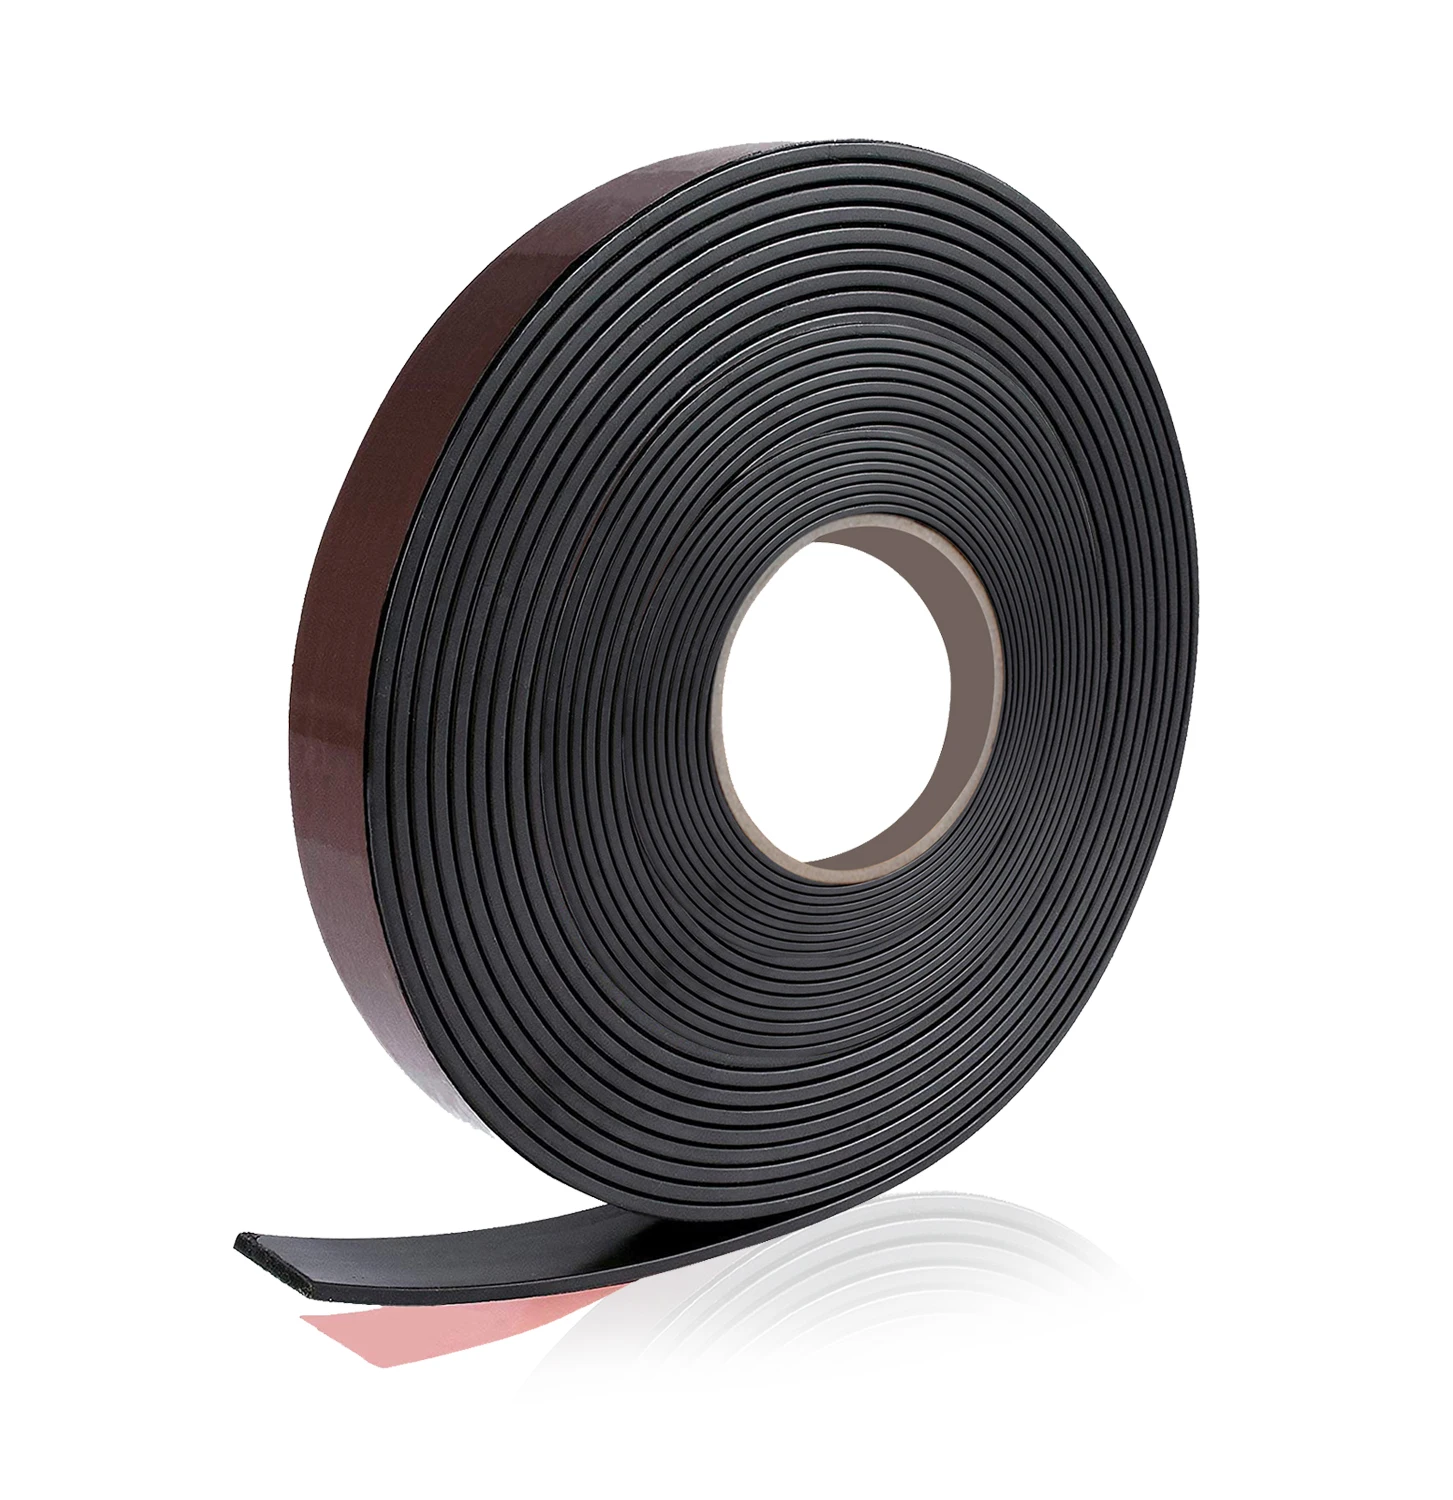 Flexible Magnetic Tape - 1 Inch x 10 Feet Magnetic Strip with